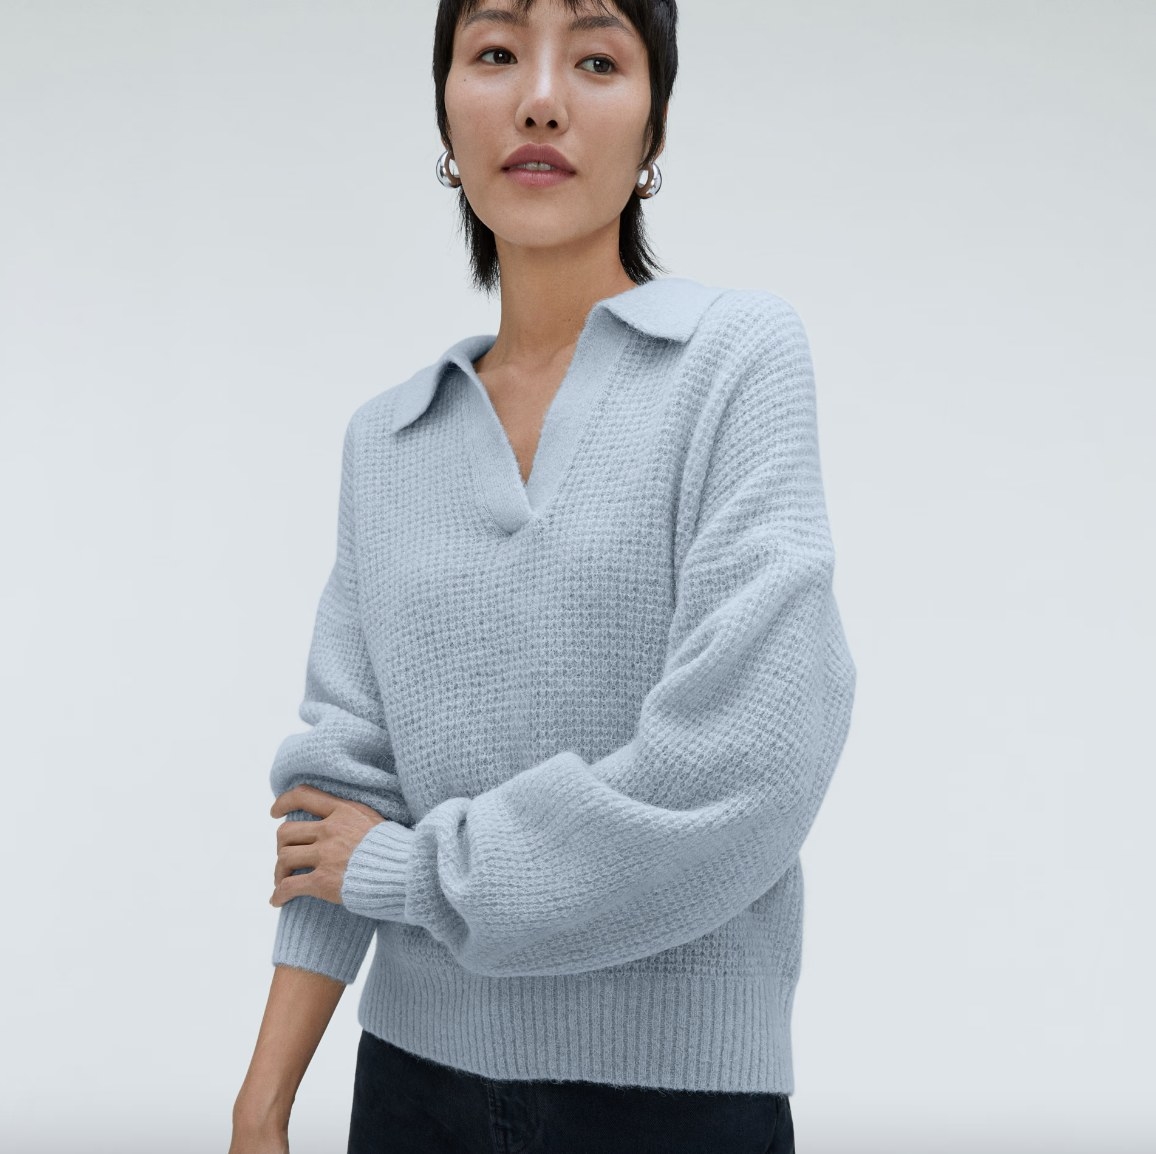 Model wearing blue sweater with black pants